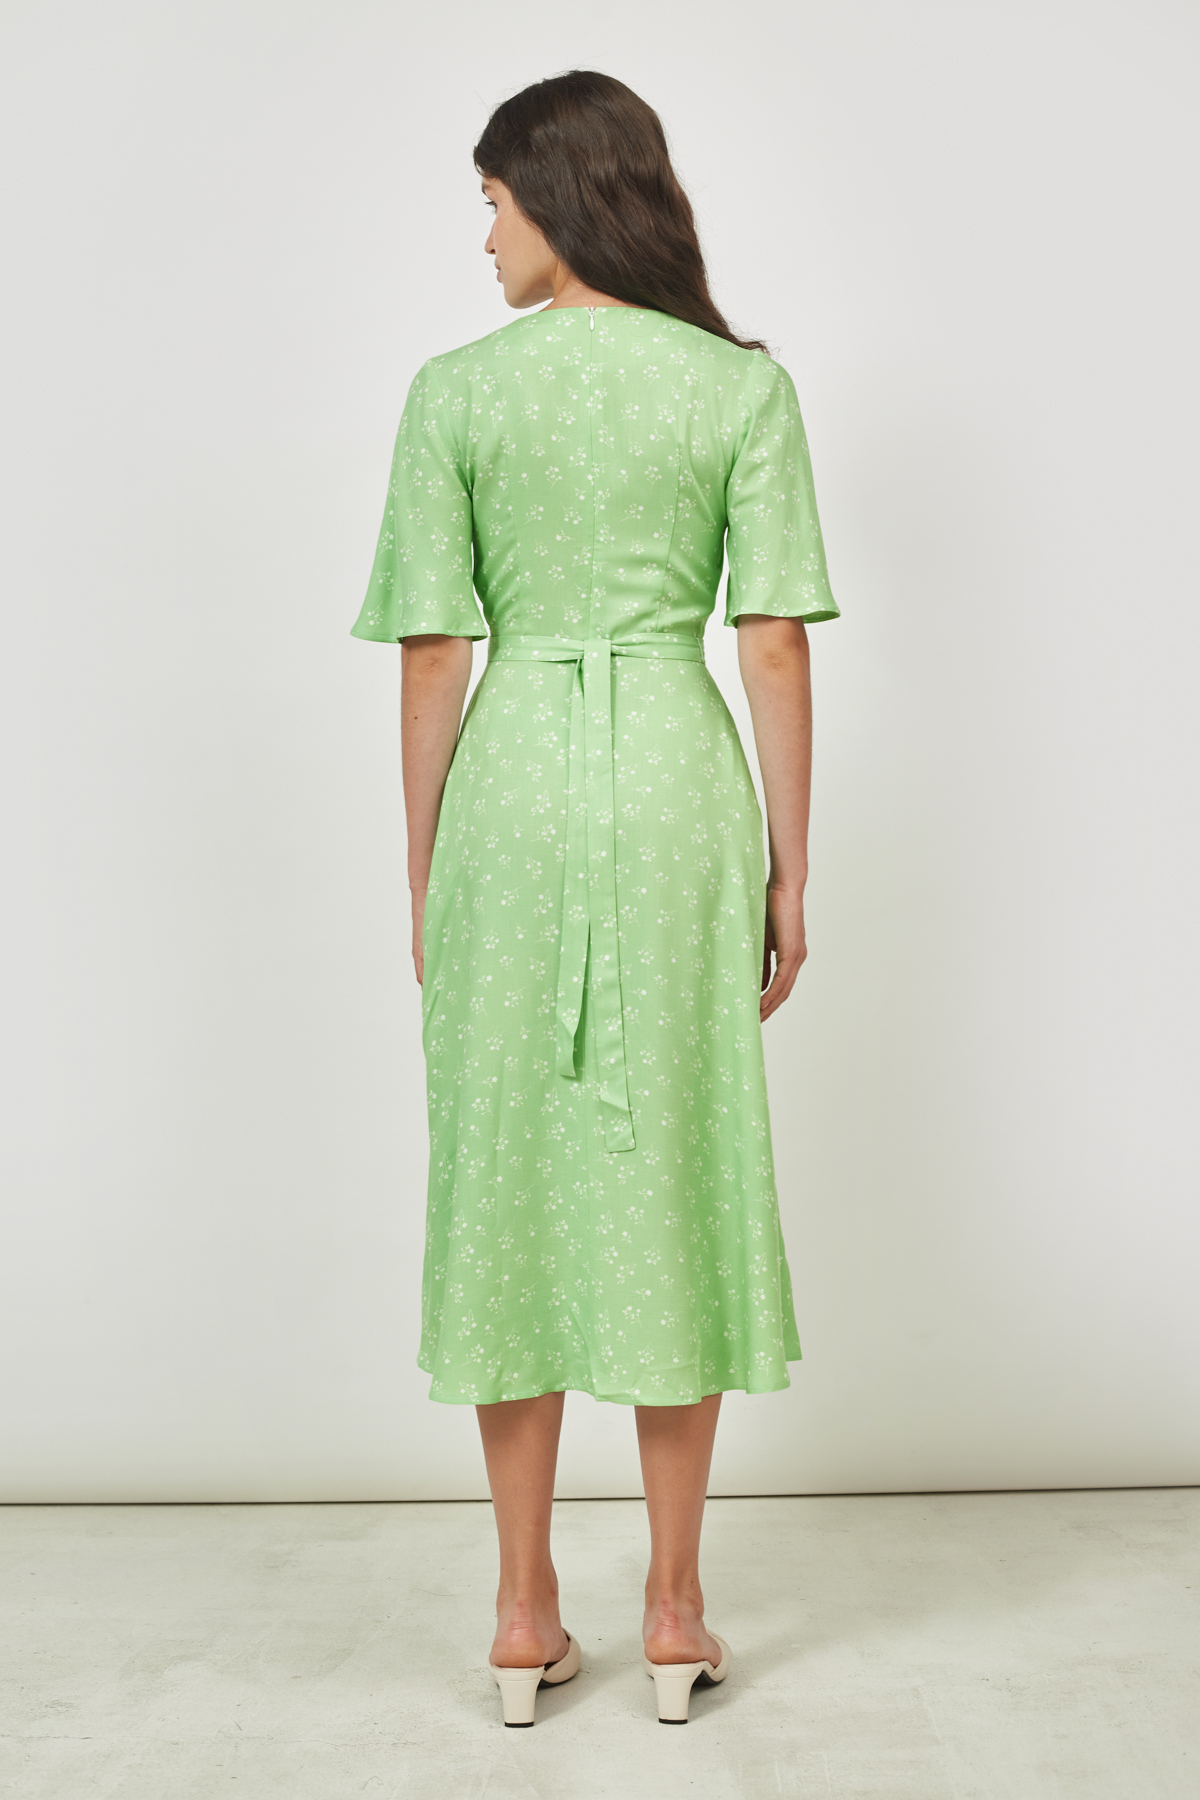 Midi dress in mint viscose with floral print, photo 5